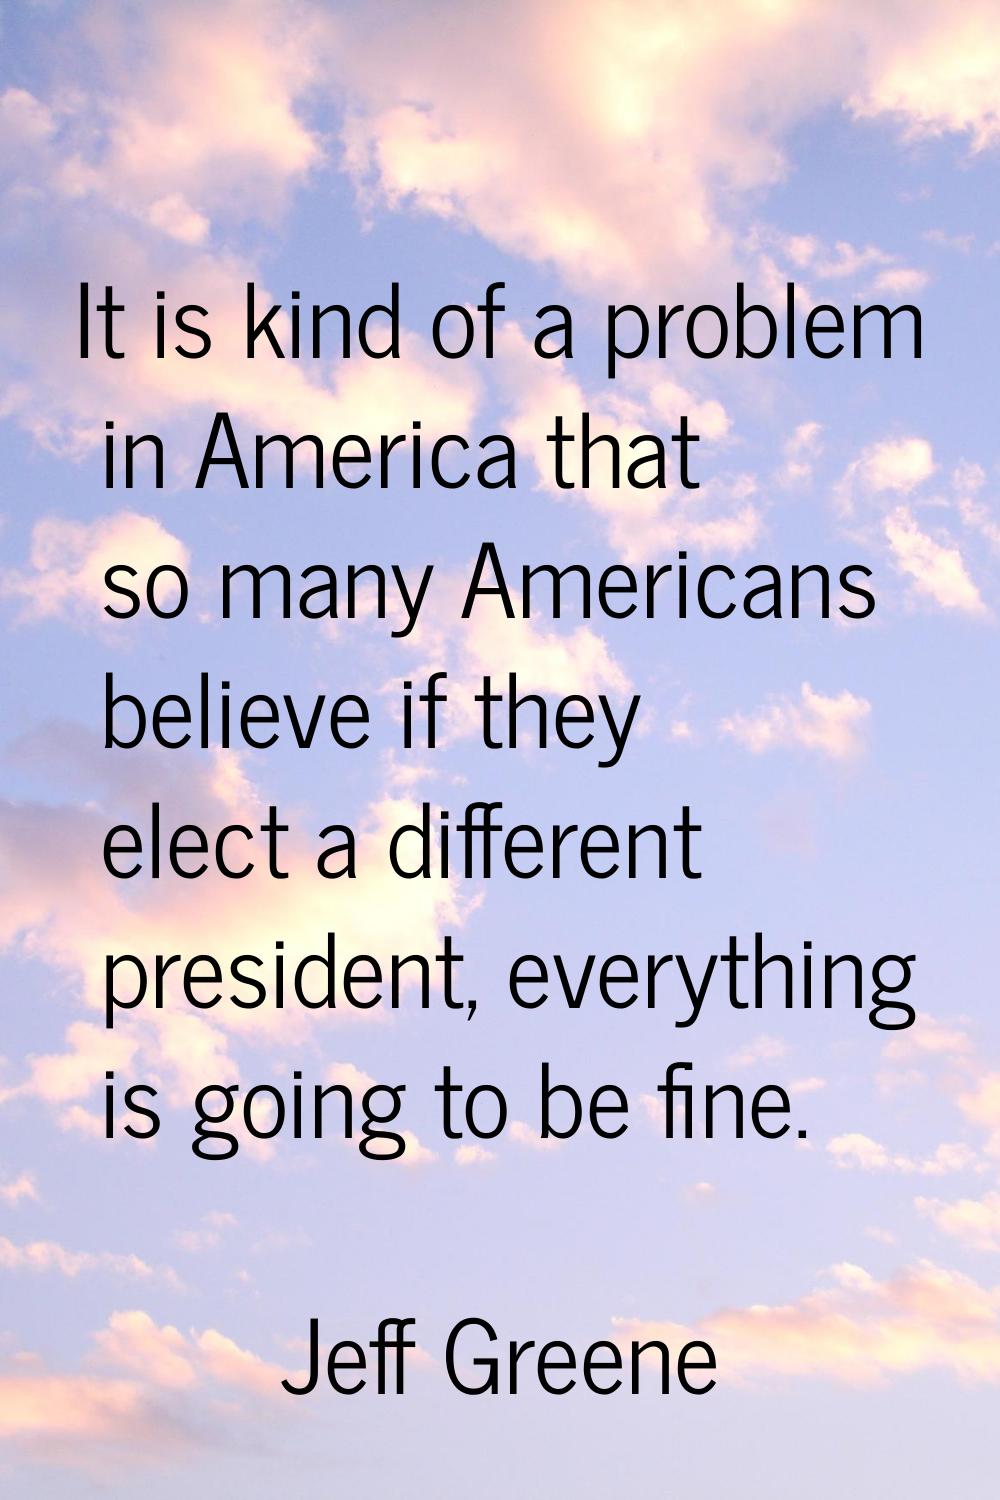 It is kind of a problem in America that so many Americans believe if they elect a different preside